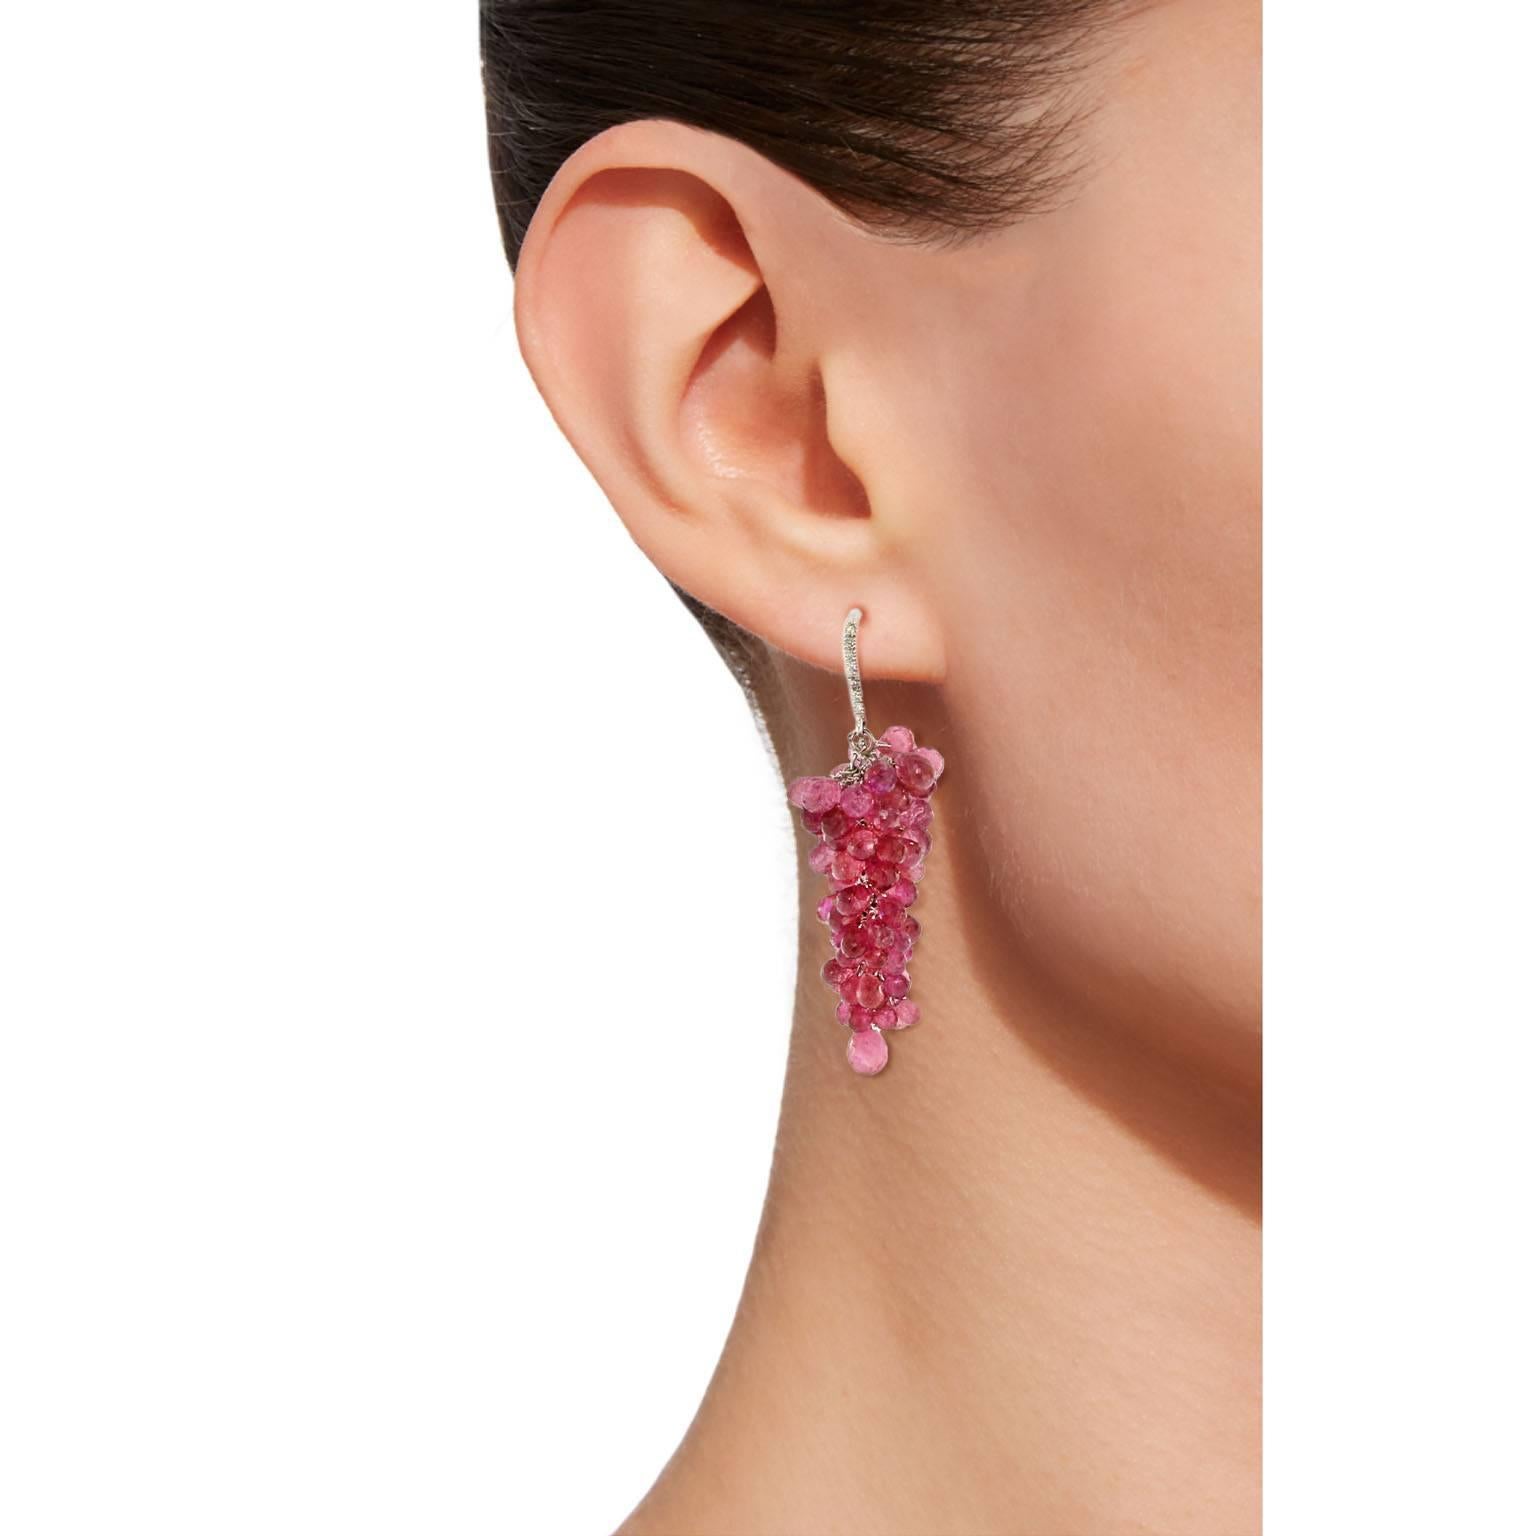 Jona one-of-a-kind design, hand crafted in Italy, 18 karat white gold, cluster pendant earrings, featuring 68.30 carats briolette cut rubellite and 0.11 carats of white diamonds.
All Jona jewelry is new and has never been previously owned or worn.